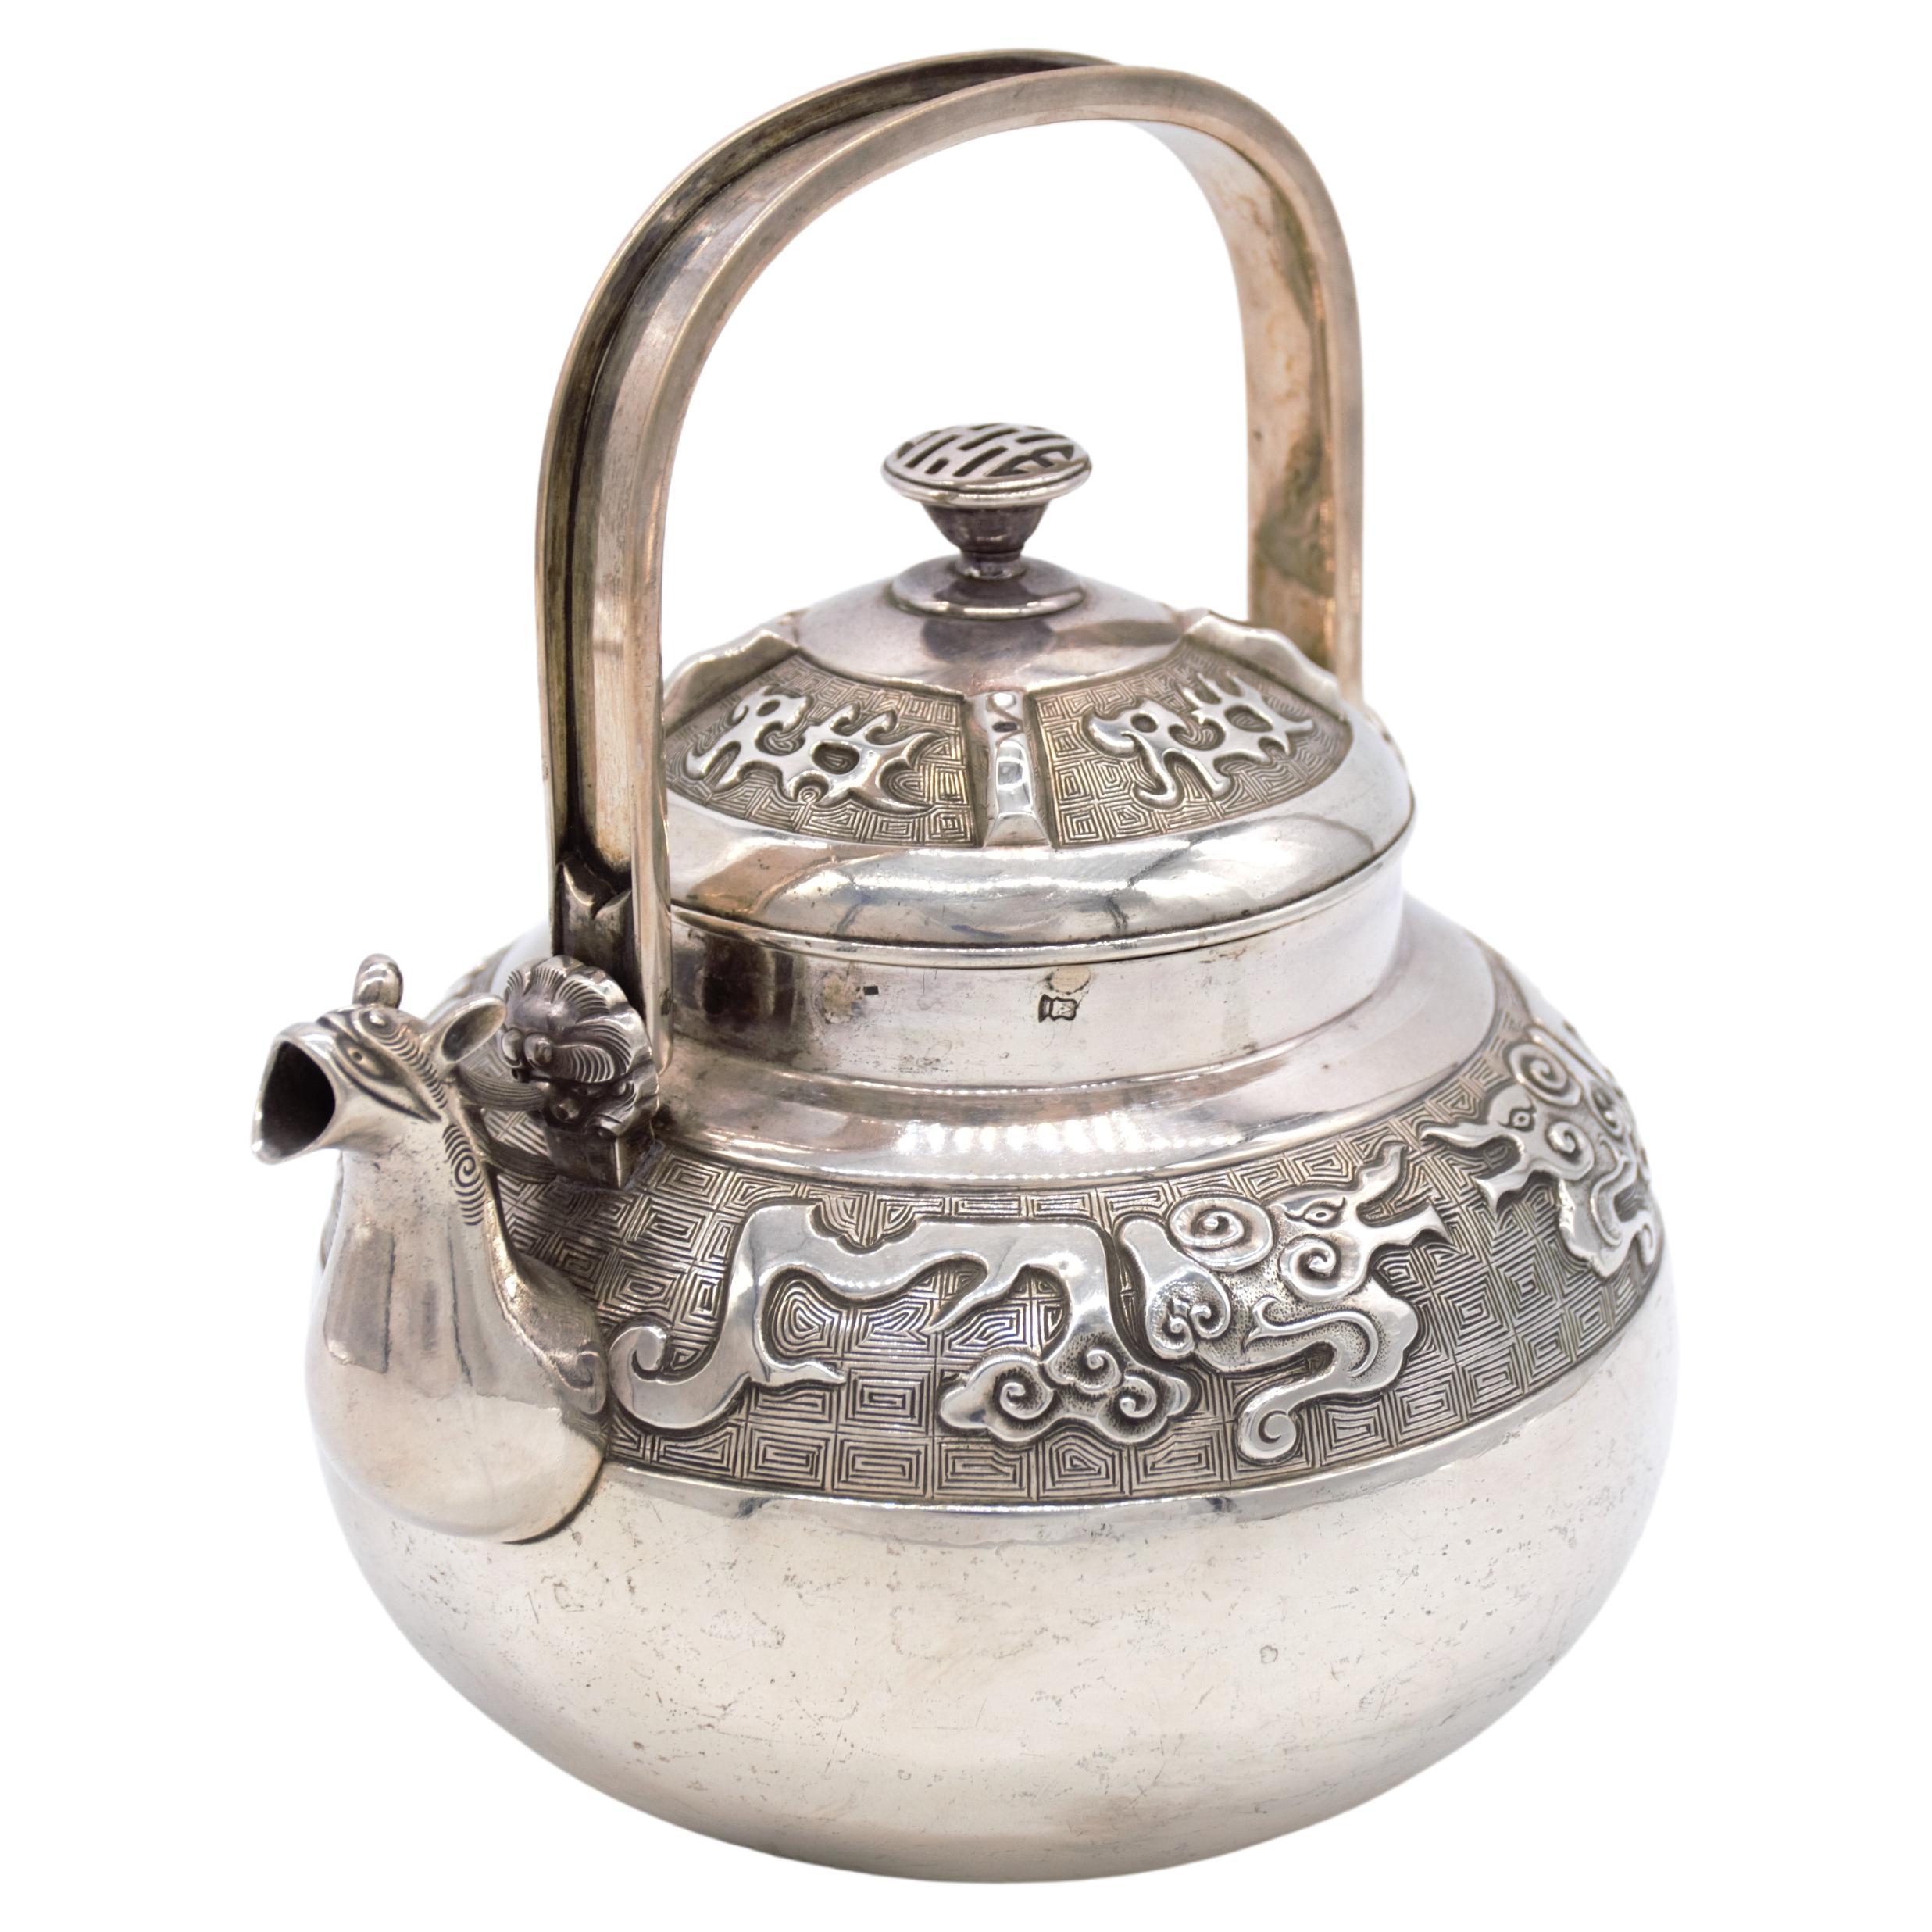 amazing rare archaistic style silver ewer or tea pot with cover, the design is Of archaistic style dragons on the main frieze and on the cover, this style came from ancient Chinese art, the spout is designed as the head of a dragon or a mythical